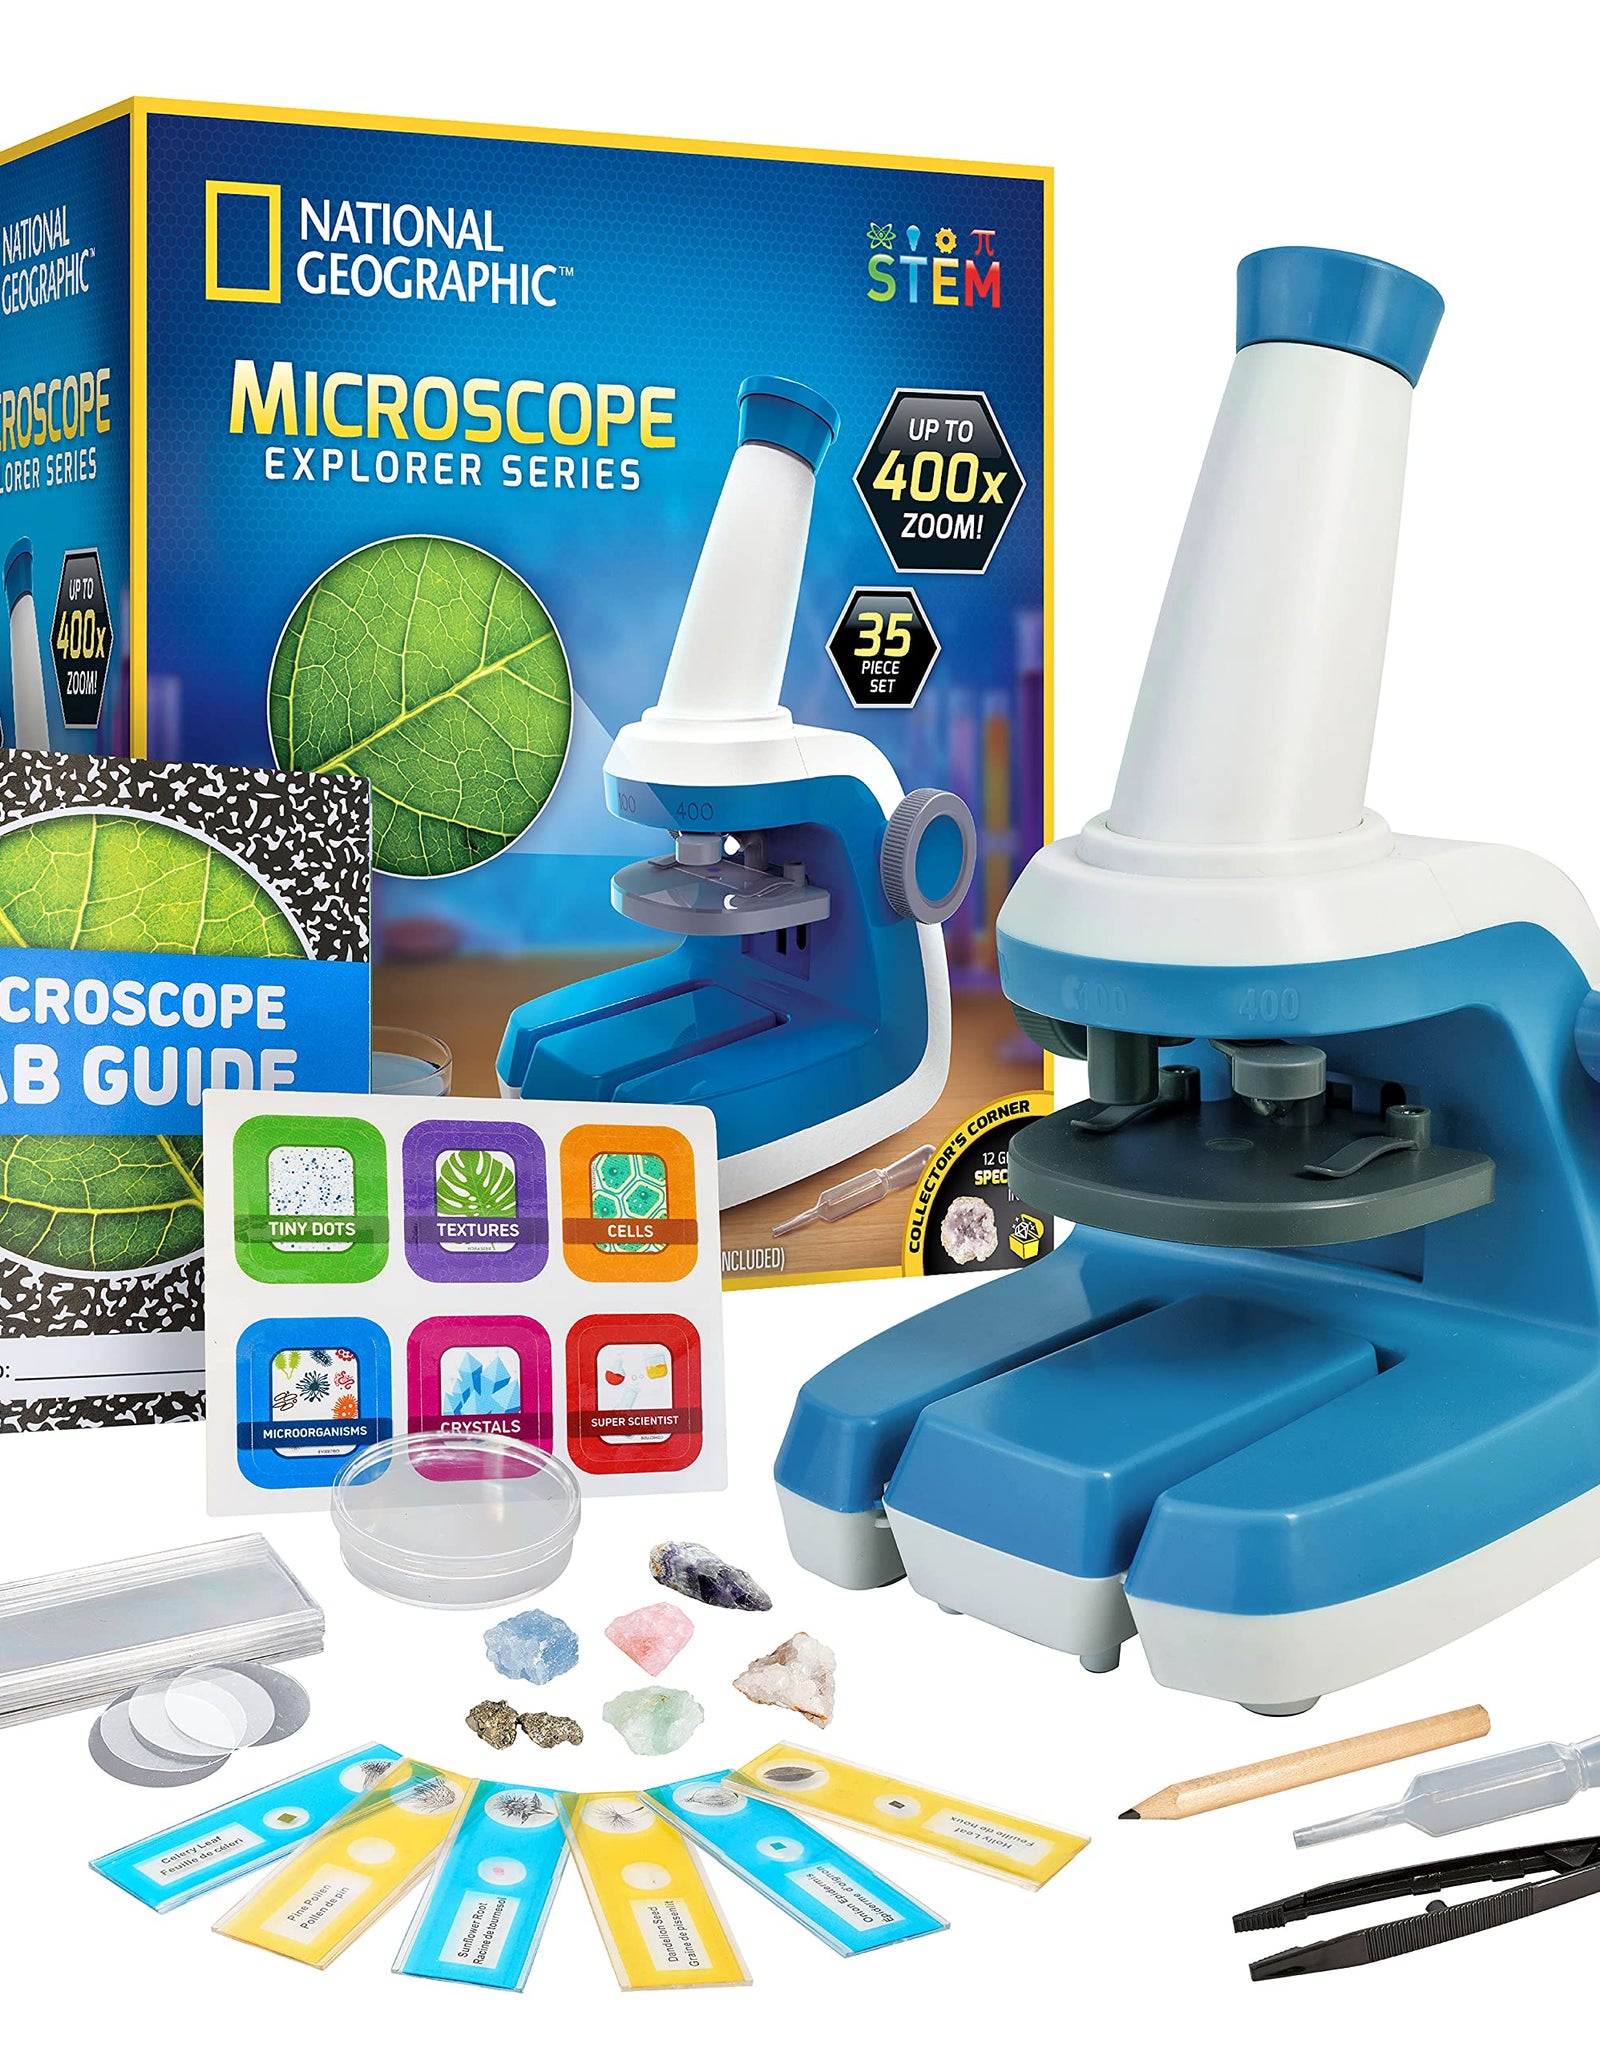 NATIONAL GEOGRAPHIC Microscope for Kids - STEM Kit with an Easy-to-Use Kids Microscope, Up to 400x Zoom, Blank and Prepared Slides, Rock and Mineral Specimens, and More, Great Science Project Set